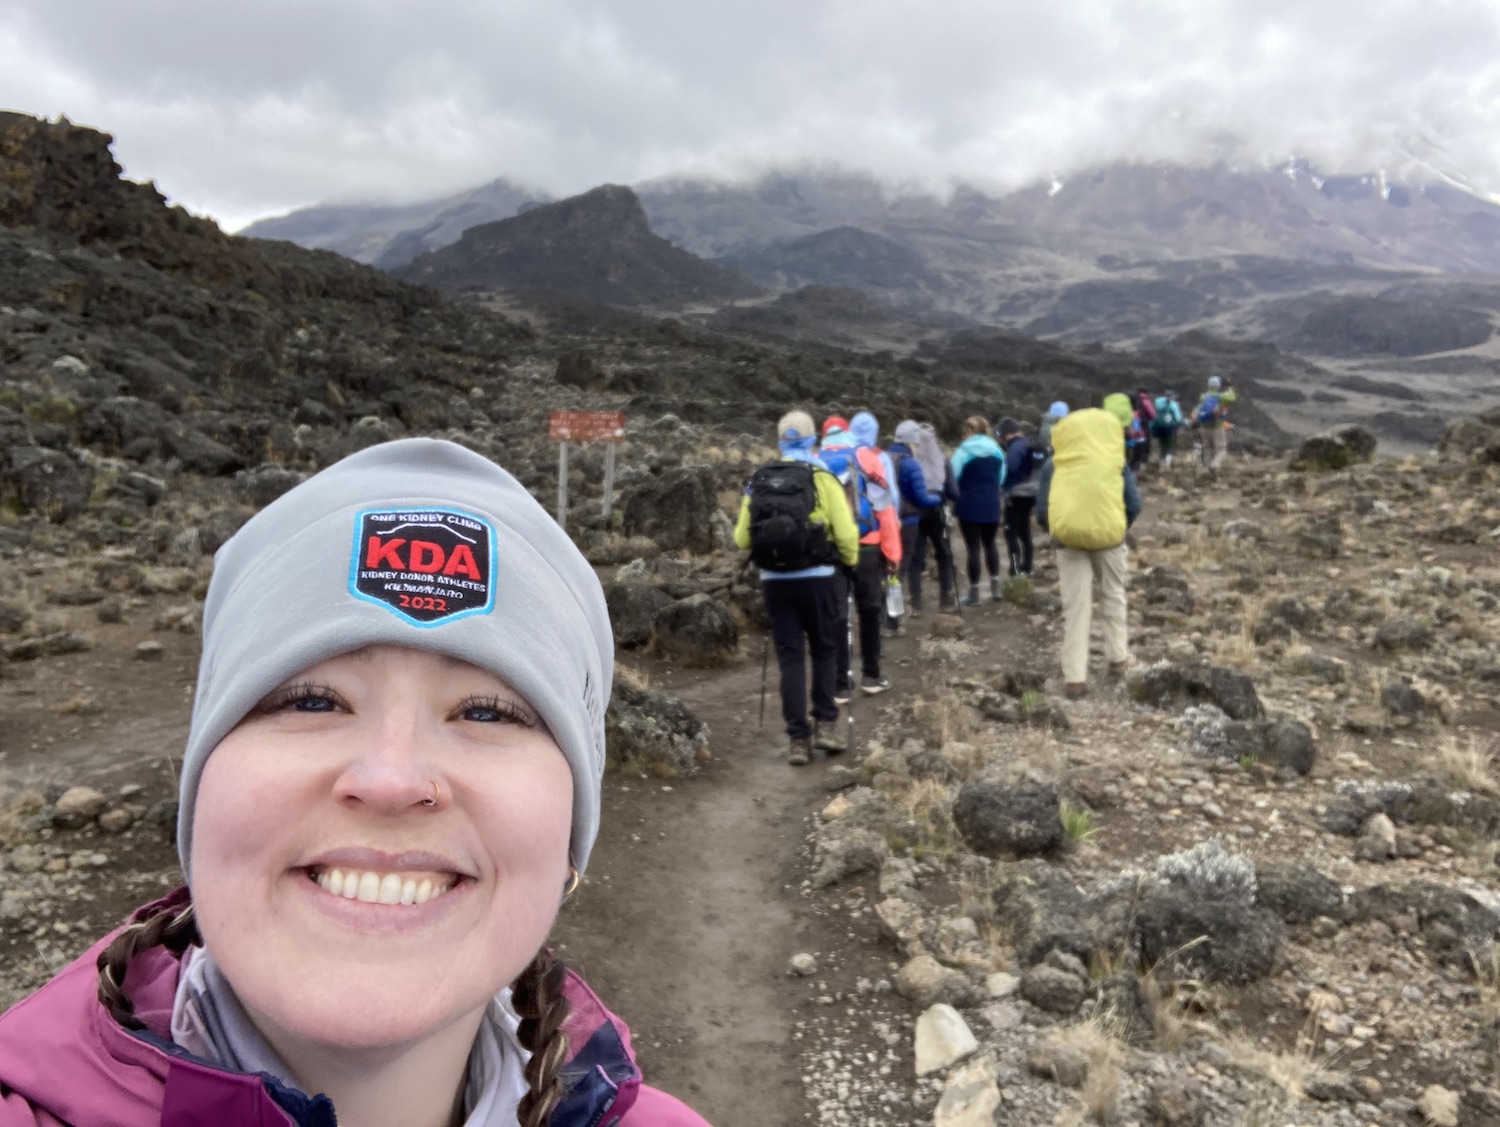 WSU student Emily Polet-Monterosso takes a selfie during the climb up Mount Kilimanjaro. Her smiling face is in the foreground and we can see several other climbers behind her.